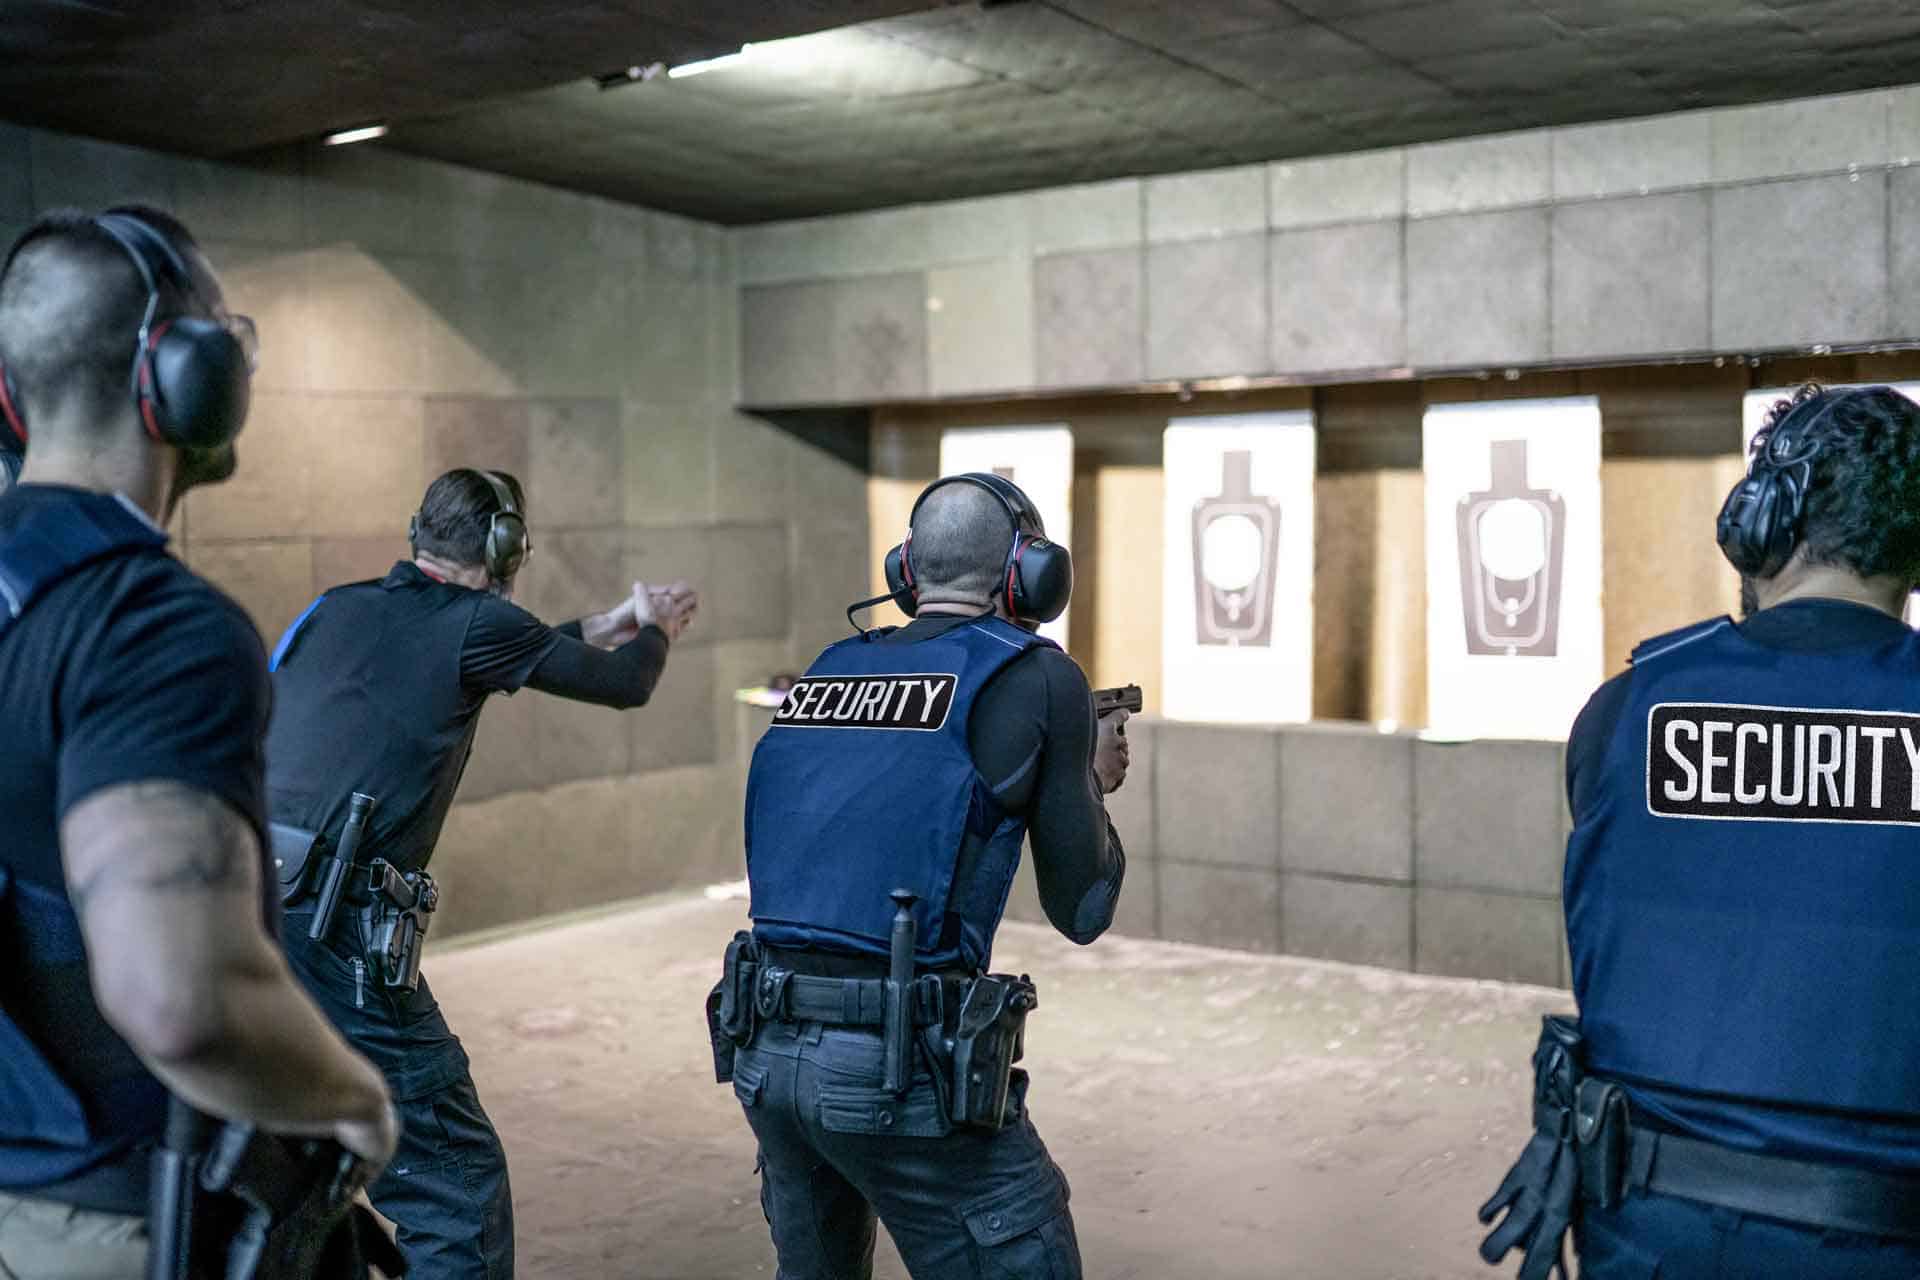 Security Training in NYC is Vital to Protect Life and Property